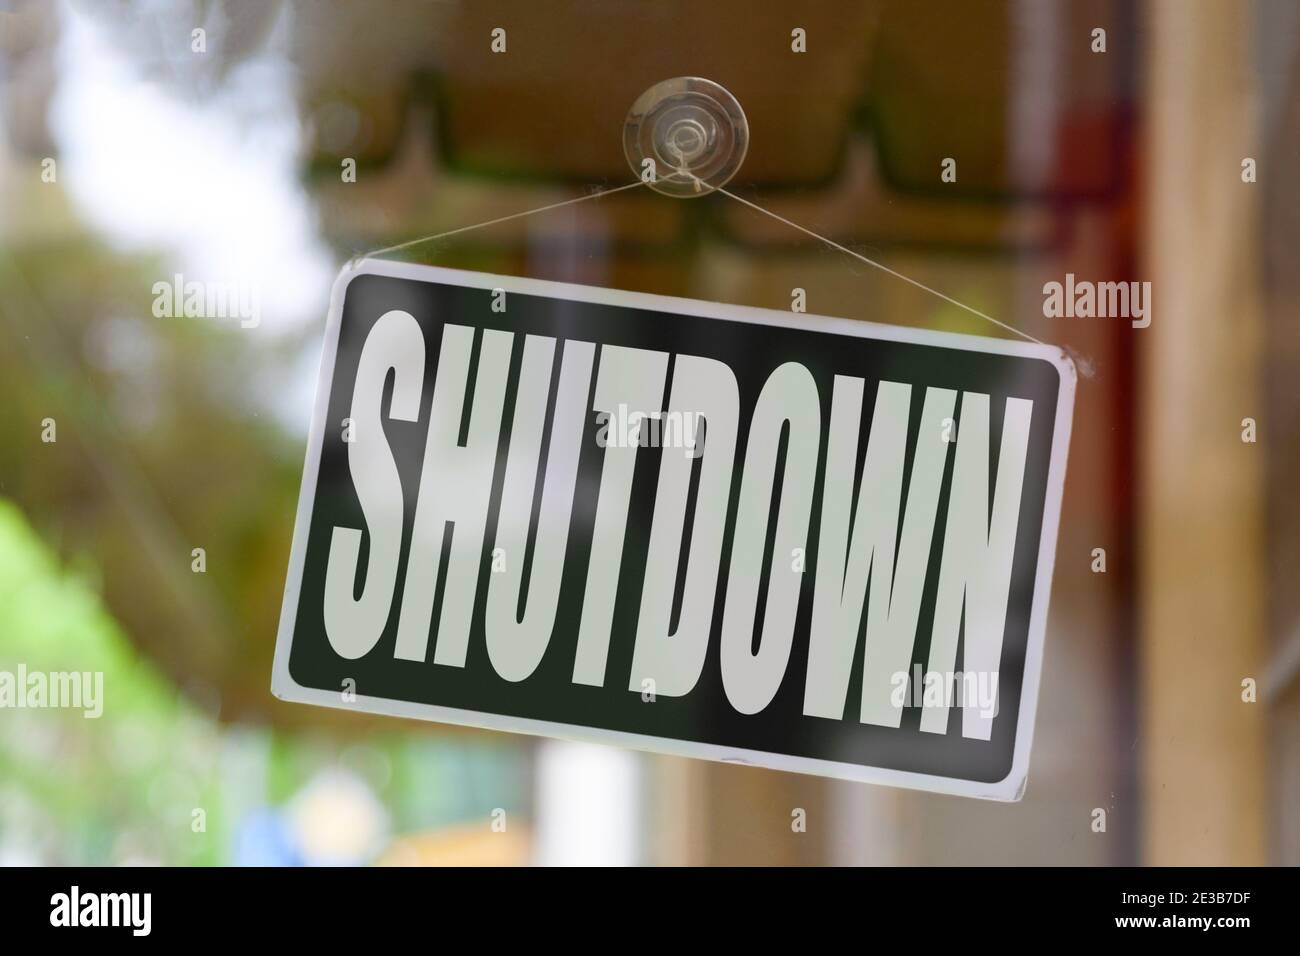 Close-up on a red open sign in the window of a shop displaying the message: Shutdown. Stock Photo